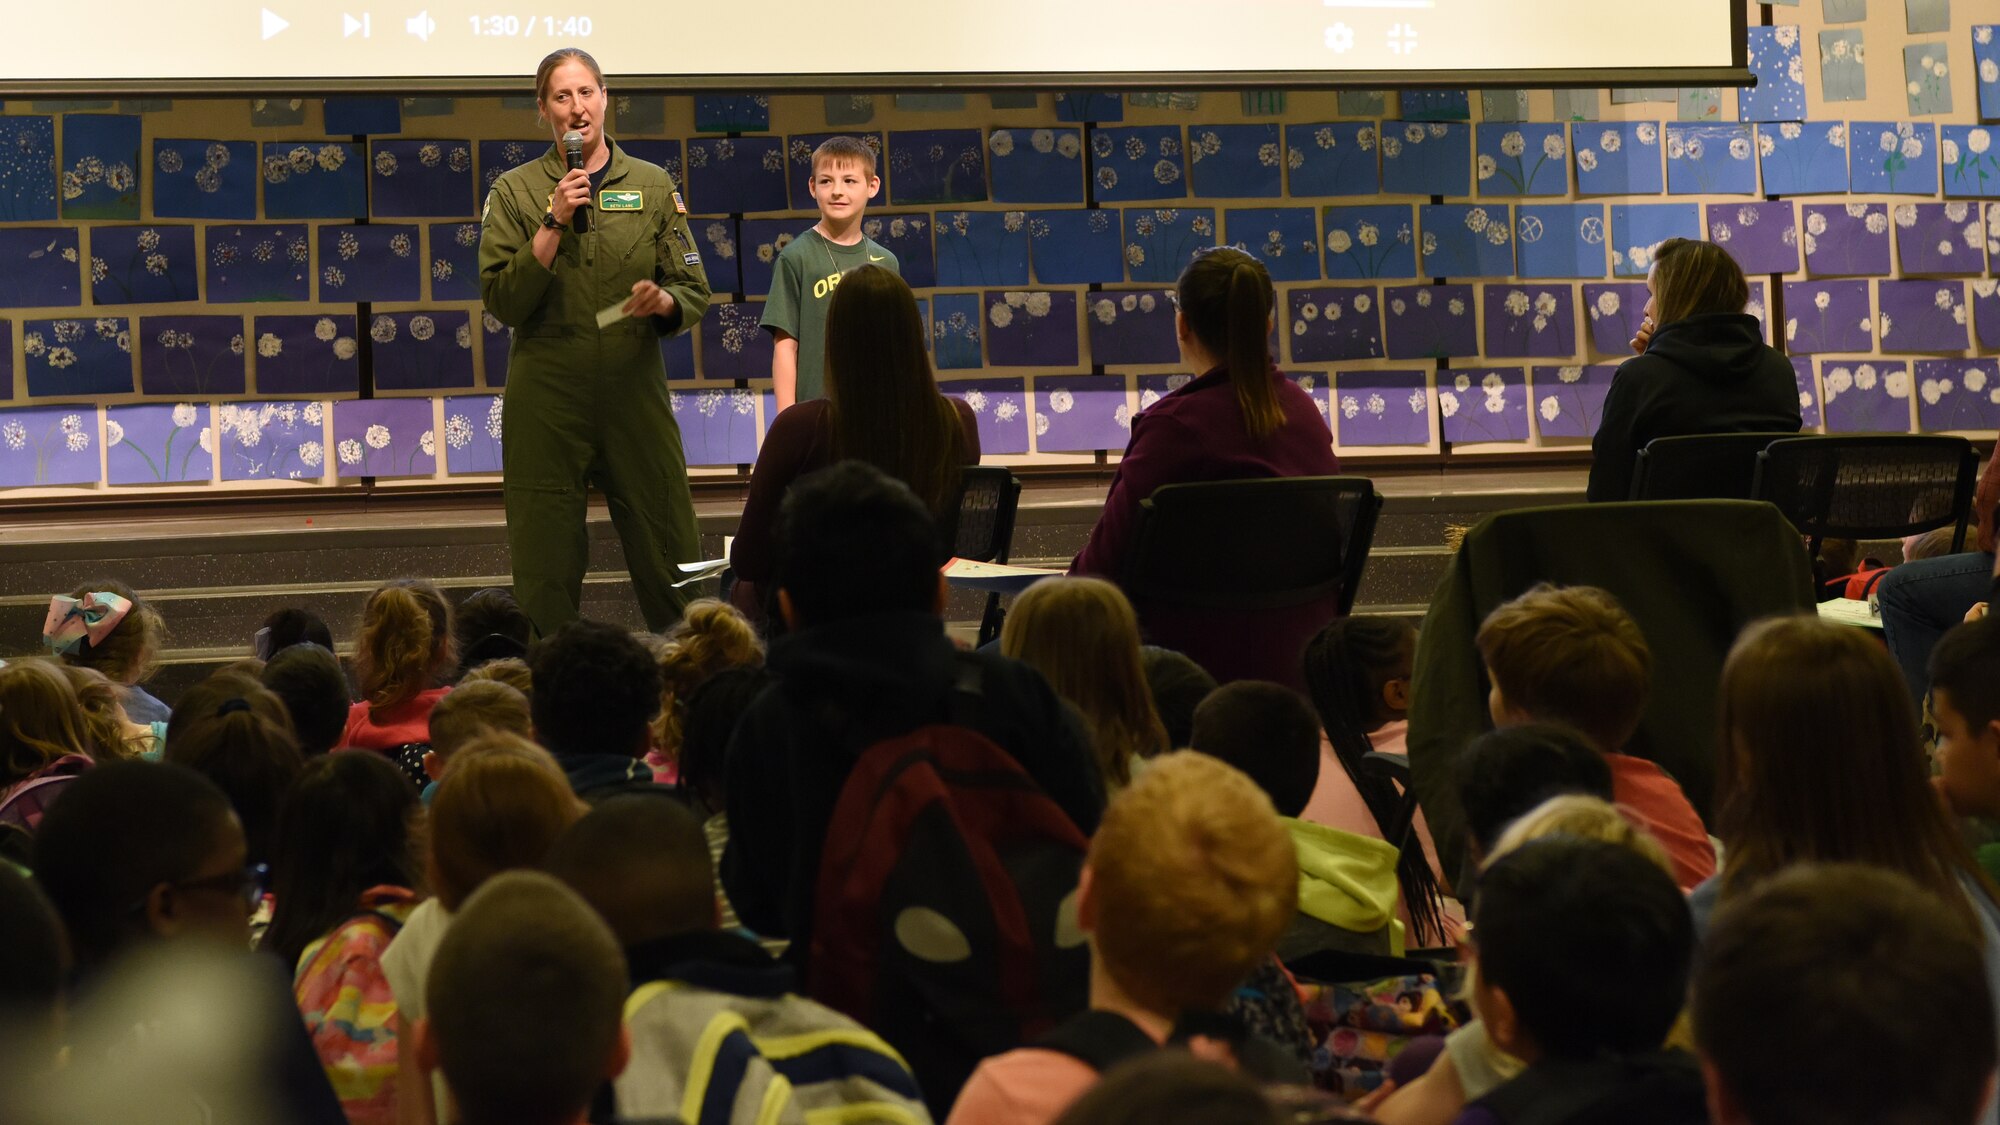 During Carter Lake Elementary School’s Month of the Military Child ceremony April 27, 2018 at Joint Base Lewis-McChord, Wash., Lt. Col. Beth Lane, 62nd Airlift Wing director of staff, left, encourages participation from kindergarten through fifth graders as her son, Josh Lane (8) rewarded enthusiastic responders with prizes.